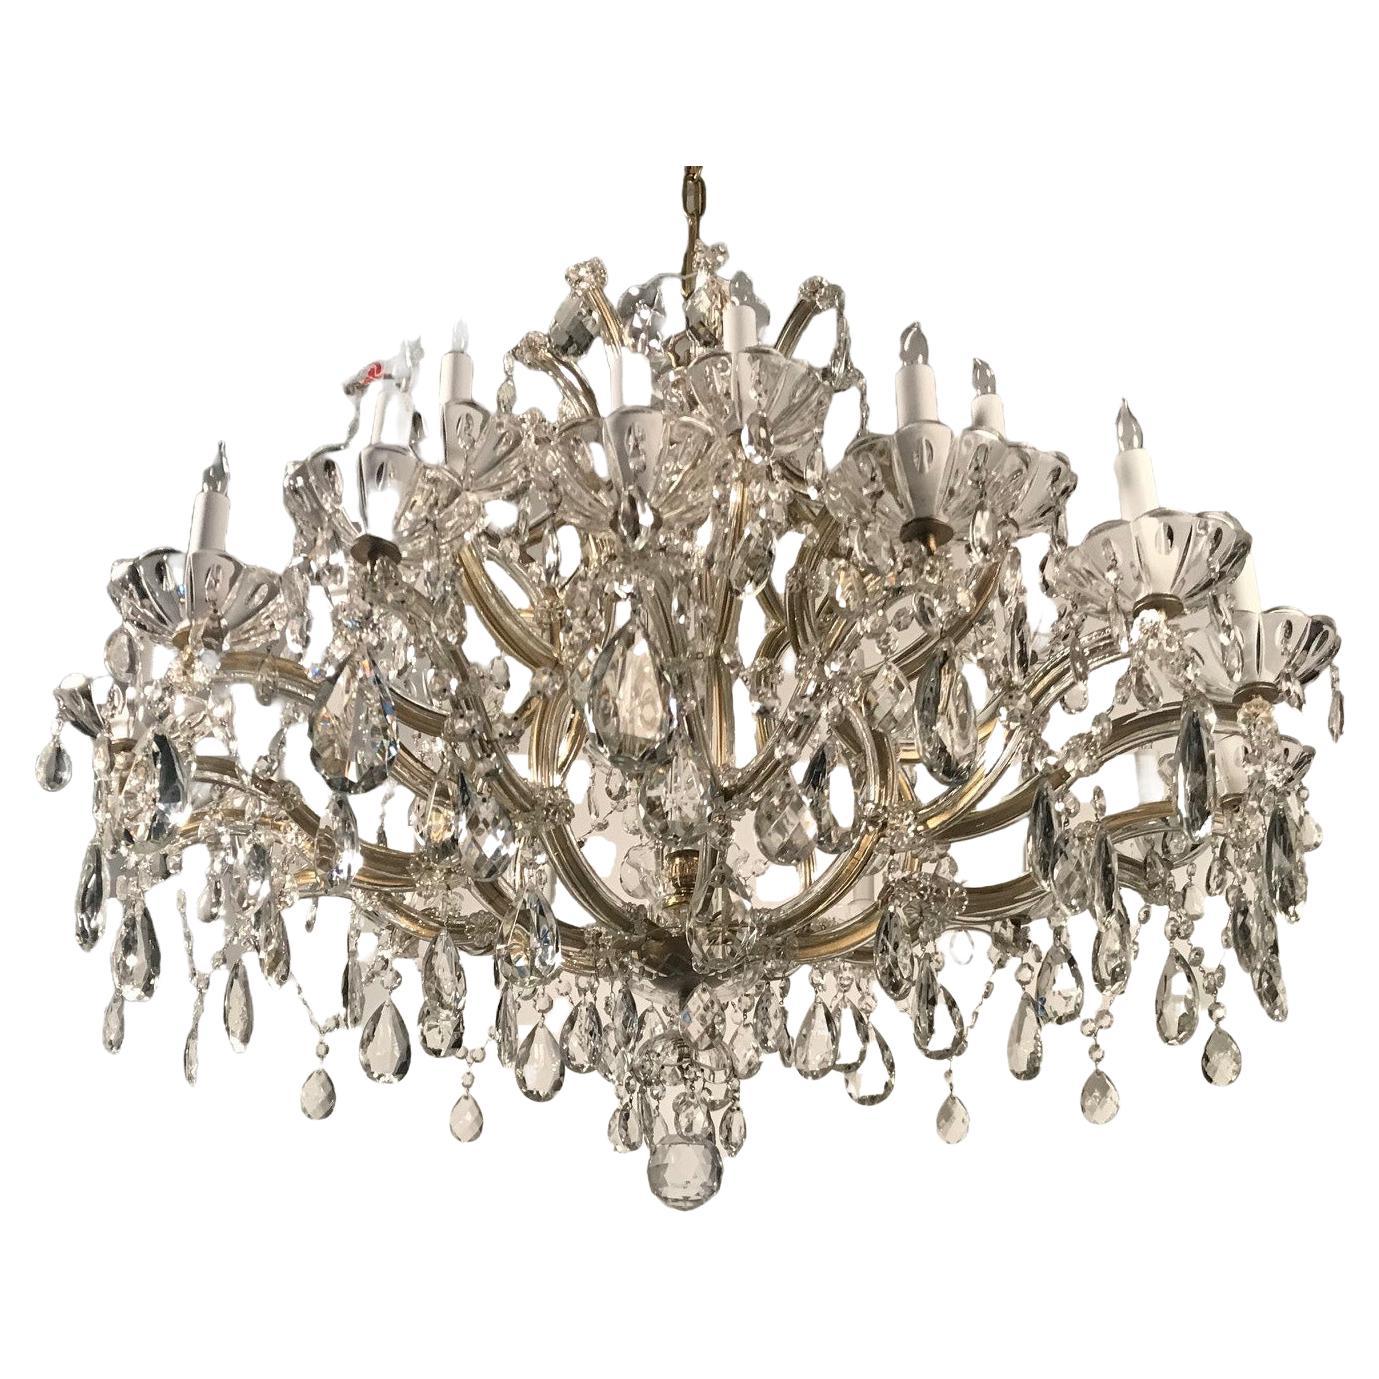 An impressive large vintage Czechoslovakian Marie-Therese style cut crystal chandelier with a shaped central body surmounted by elegant contoured scrolling arms. The whole profusely hung with drops, hanging beads and French style pendeloque